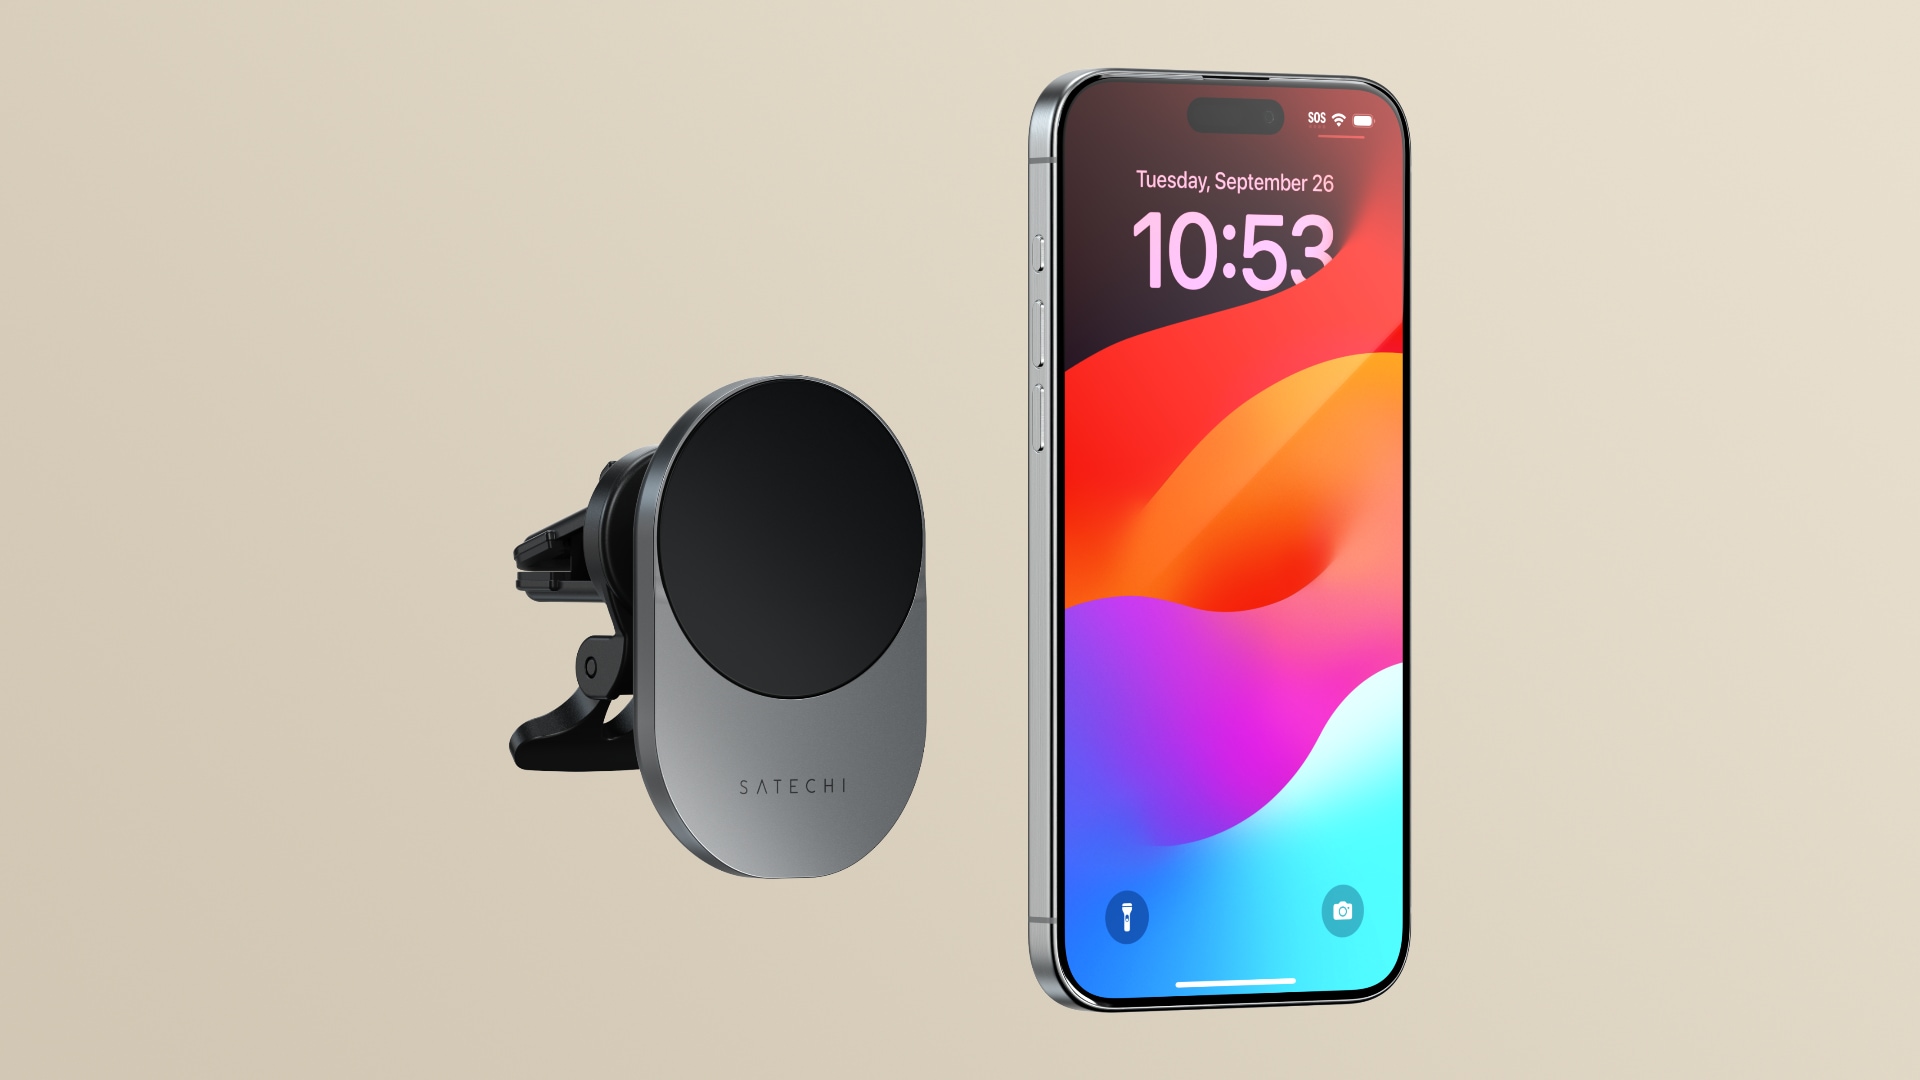 iPhone and Satechi's Qi2 wireless car charger in perspective, set against a creamy color gradient background